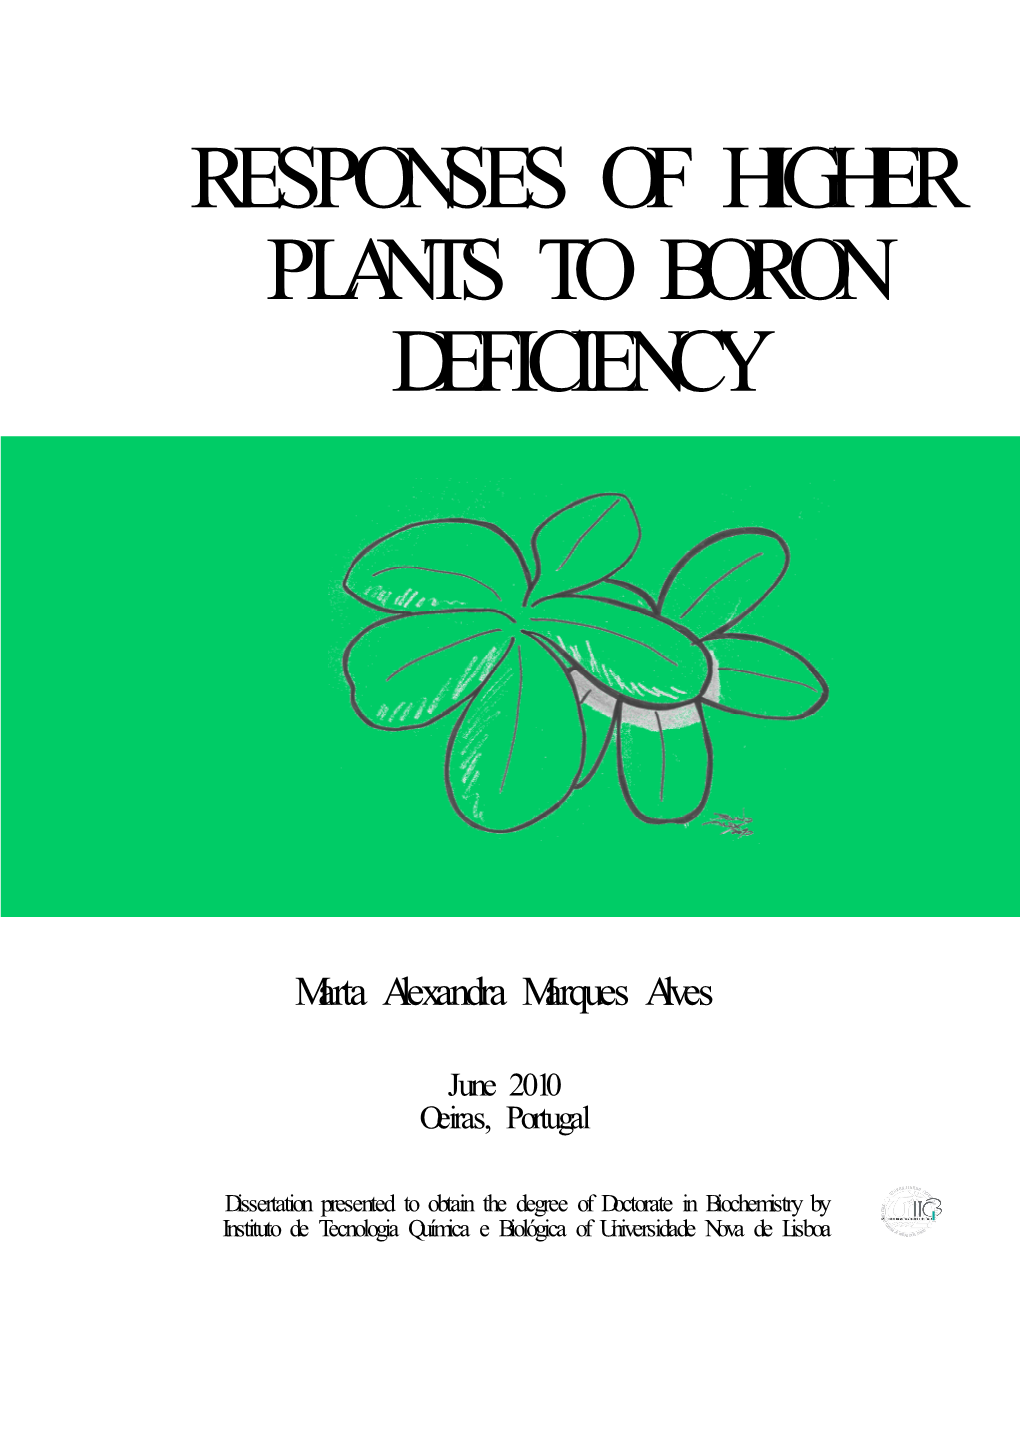 Responses of Higher Plants to Boron Deficiency